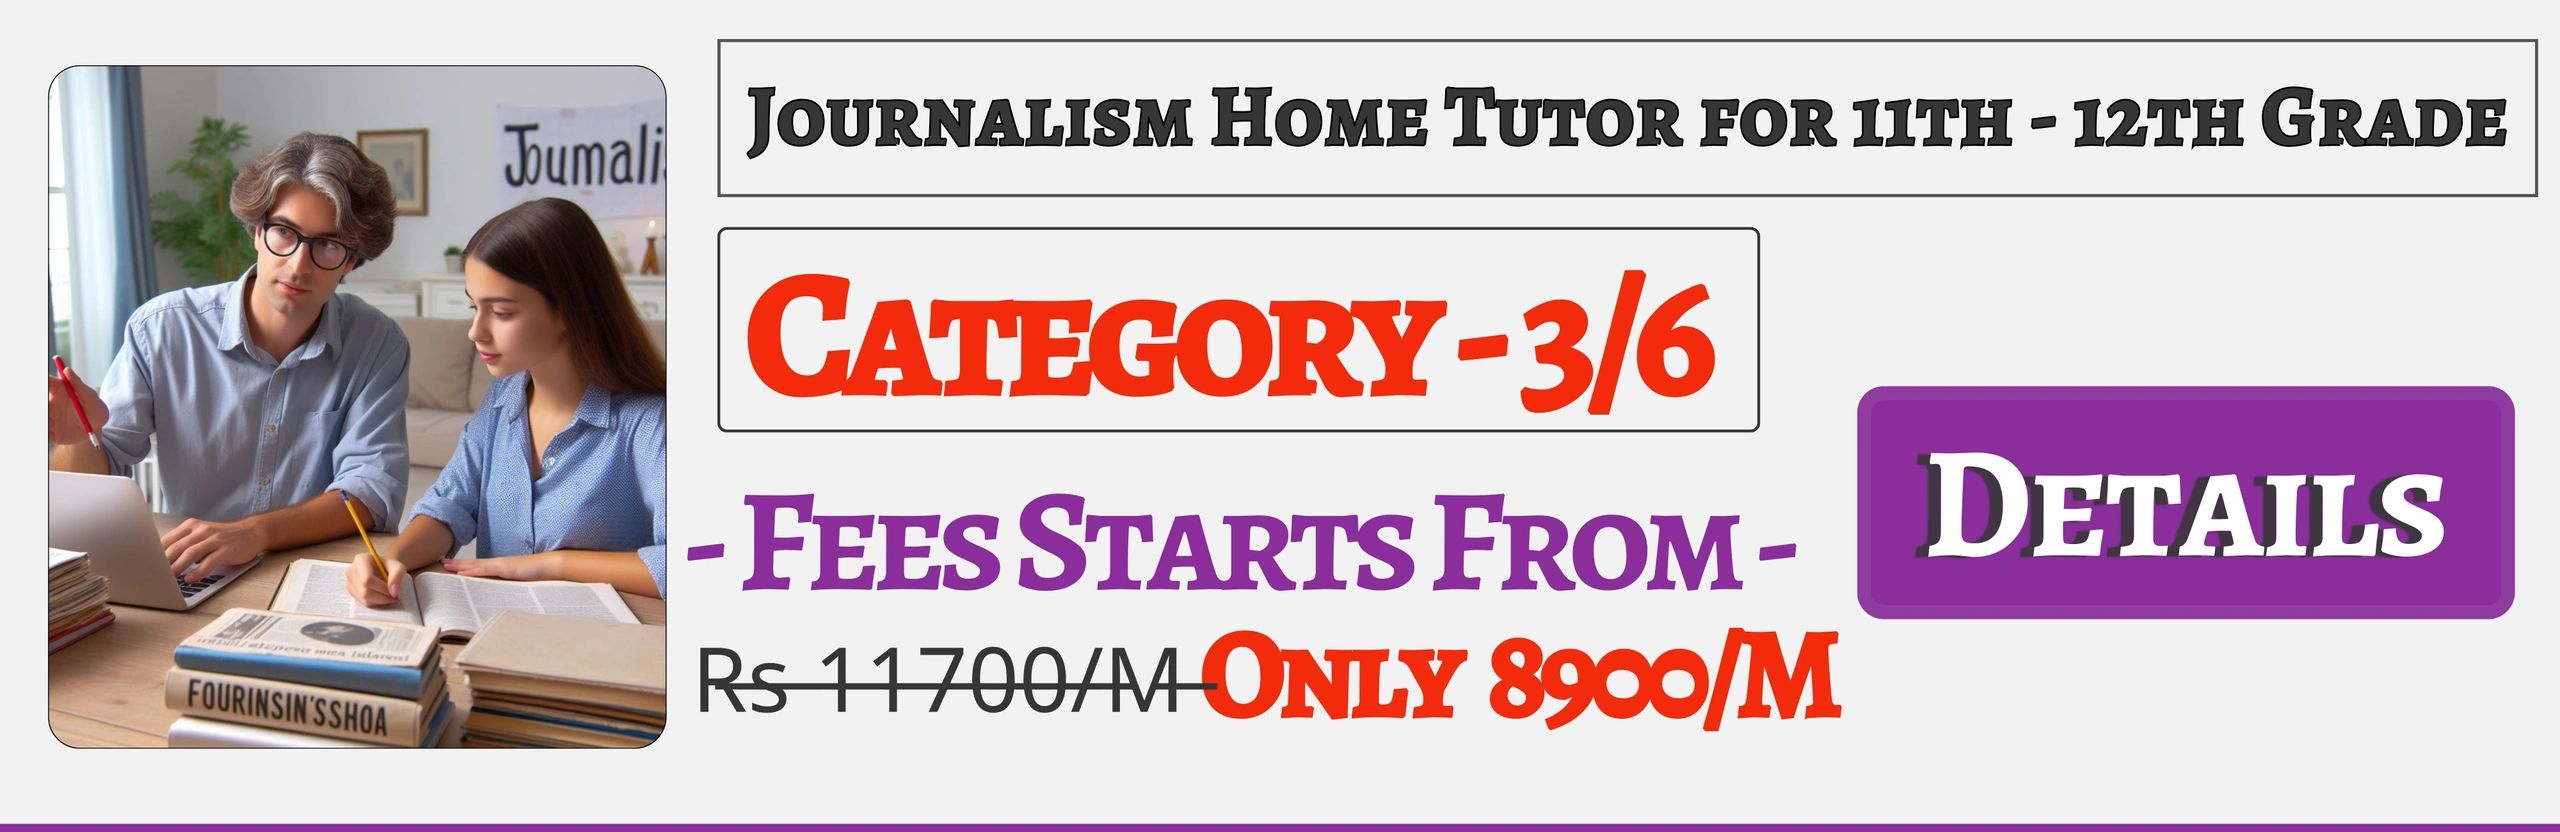 Book Best Nearby Journalism Home Tuition Tutors For 11th & 12th In Jaipur , Fees Only 89000/M